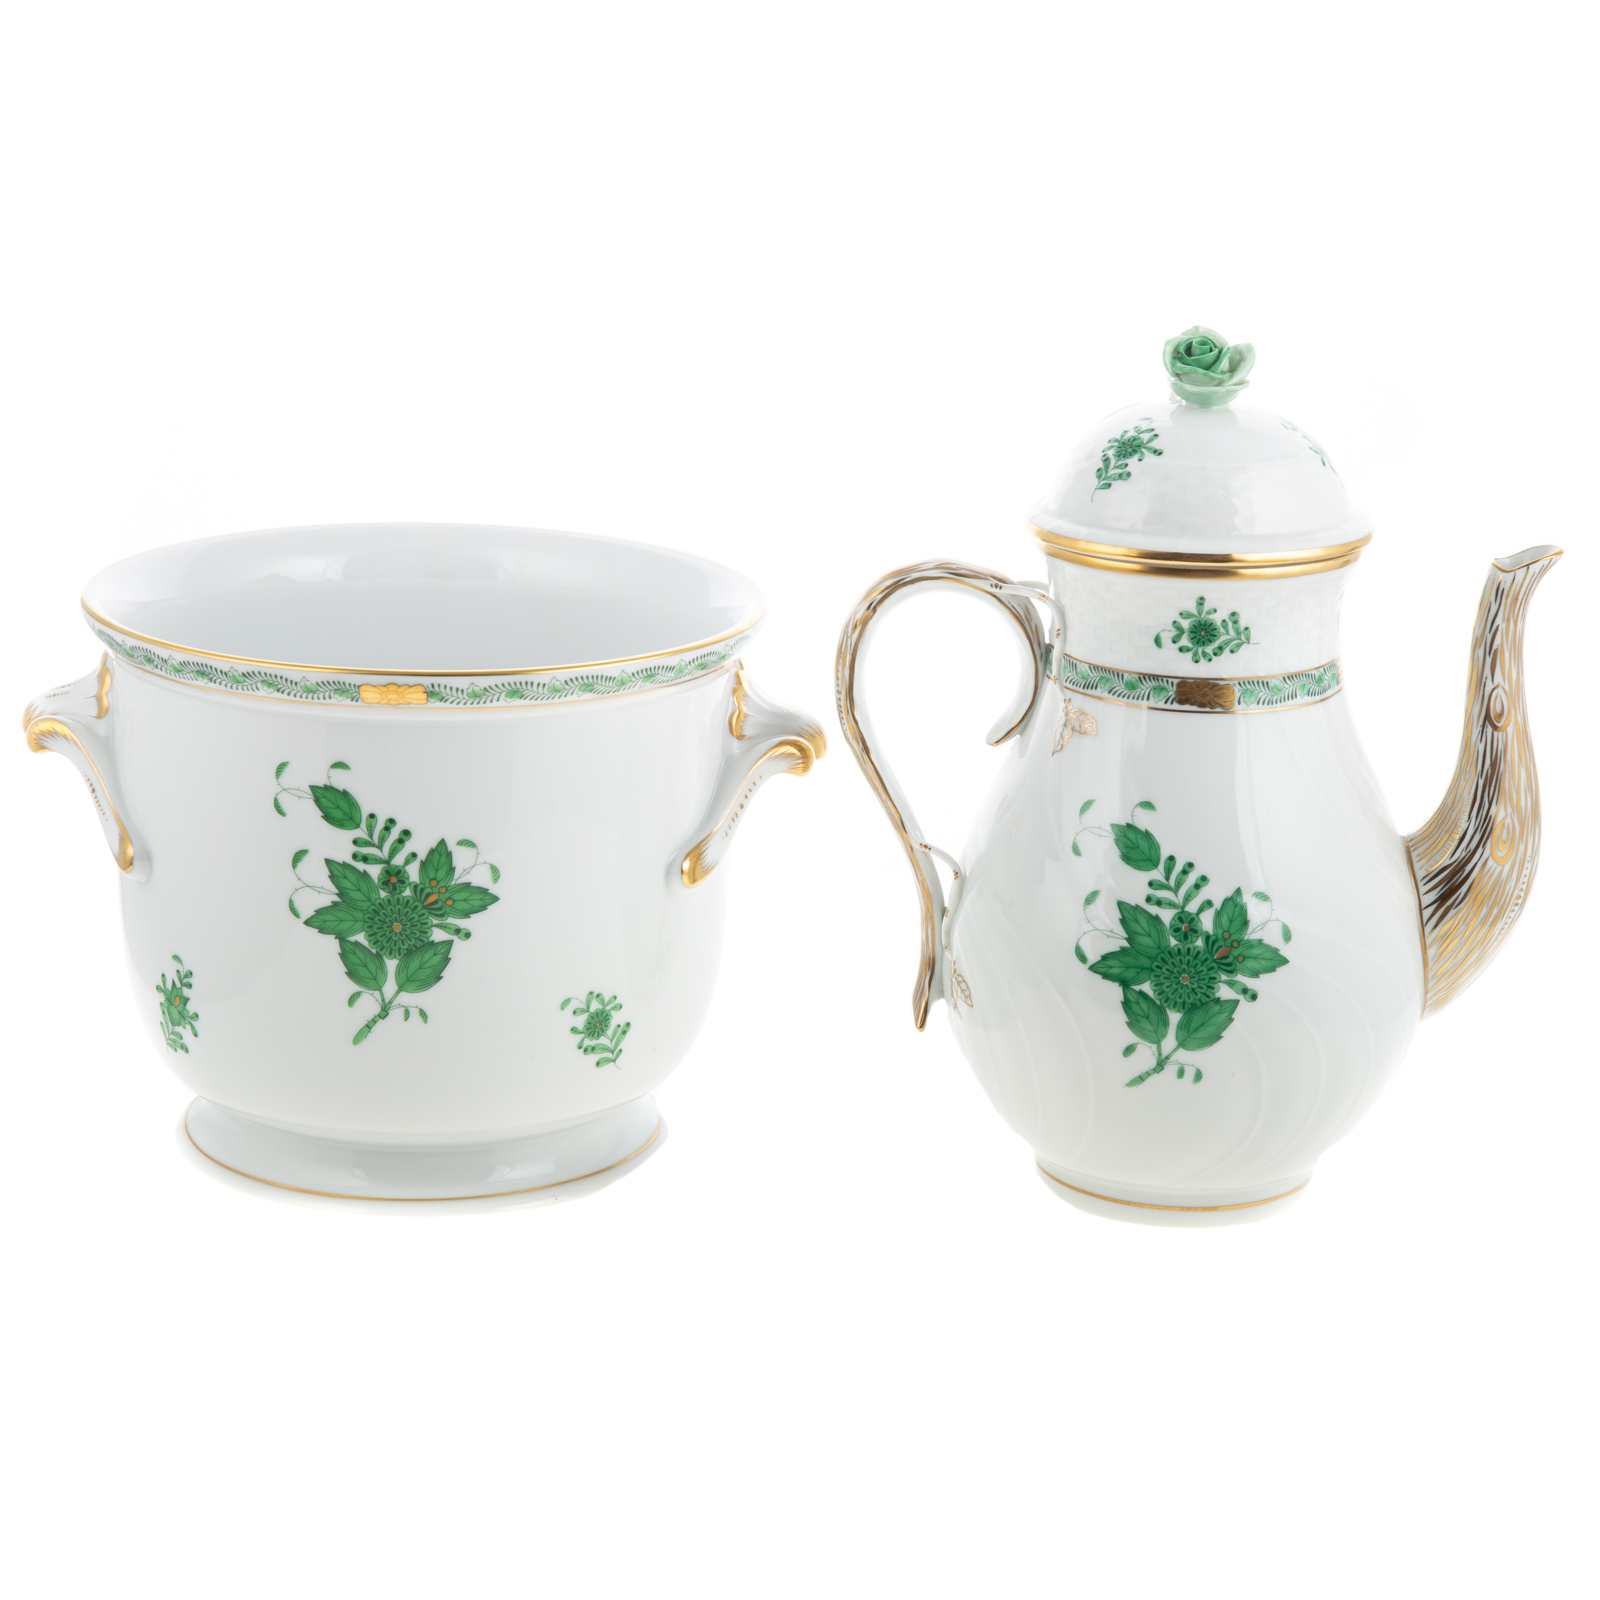 HEREND PORCELAIN CACHE POT & COFFEE